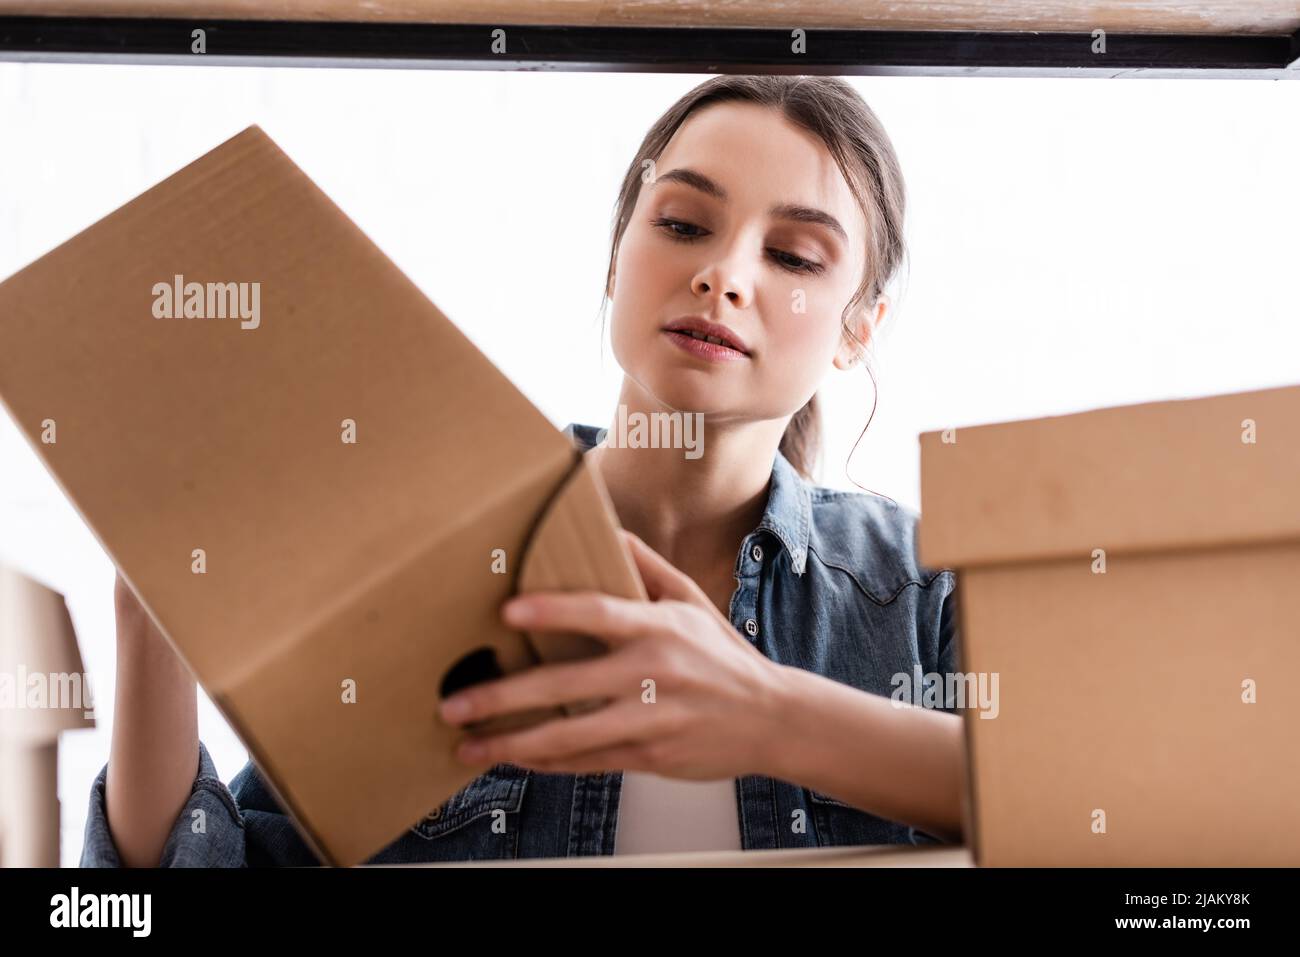 Young seller holding carton box near rack in online web store Stock Photo